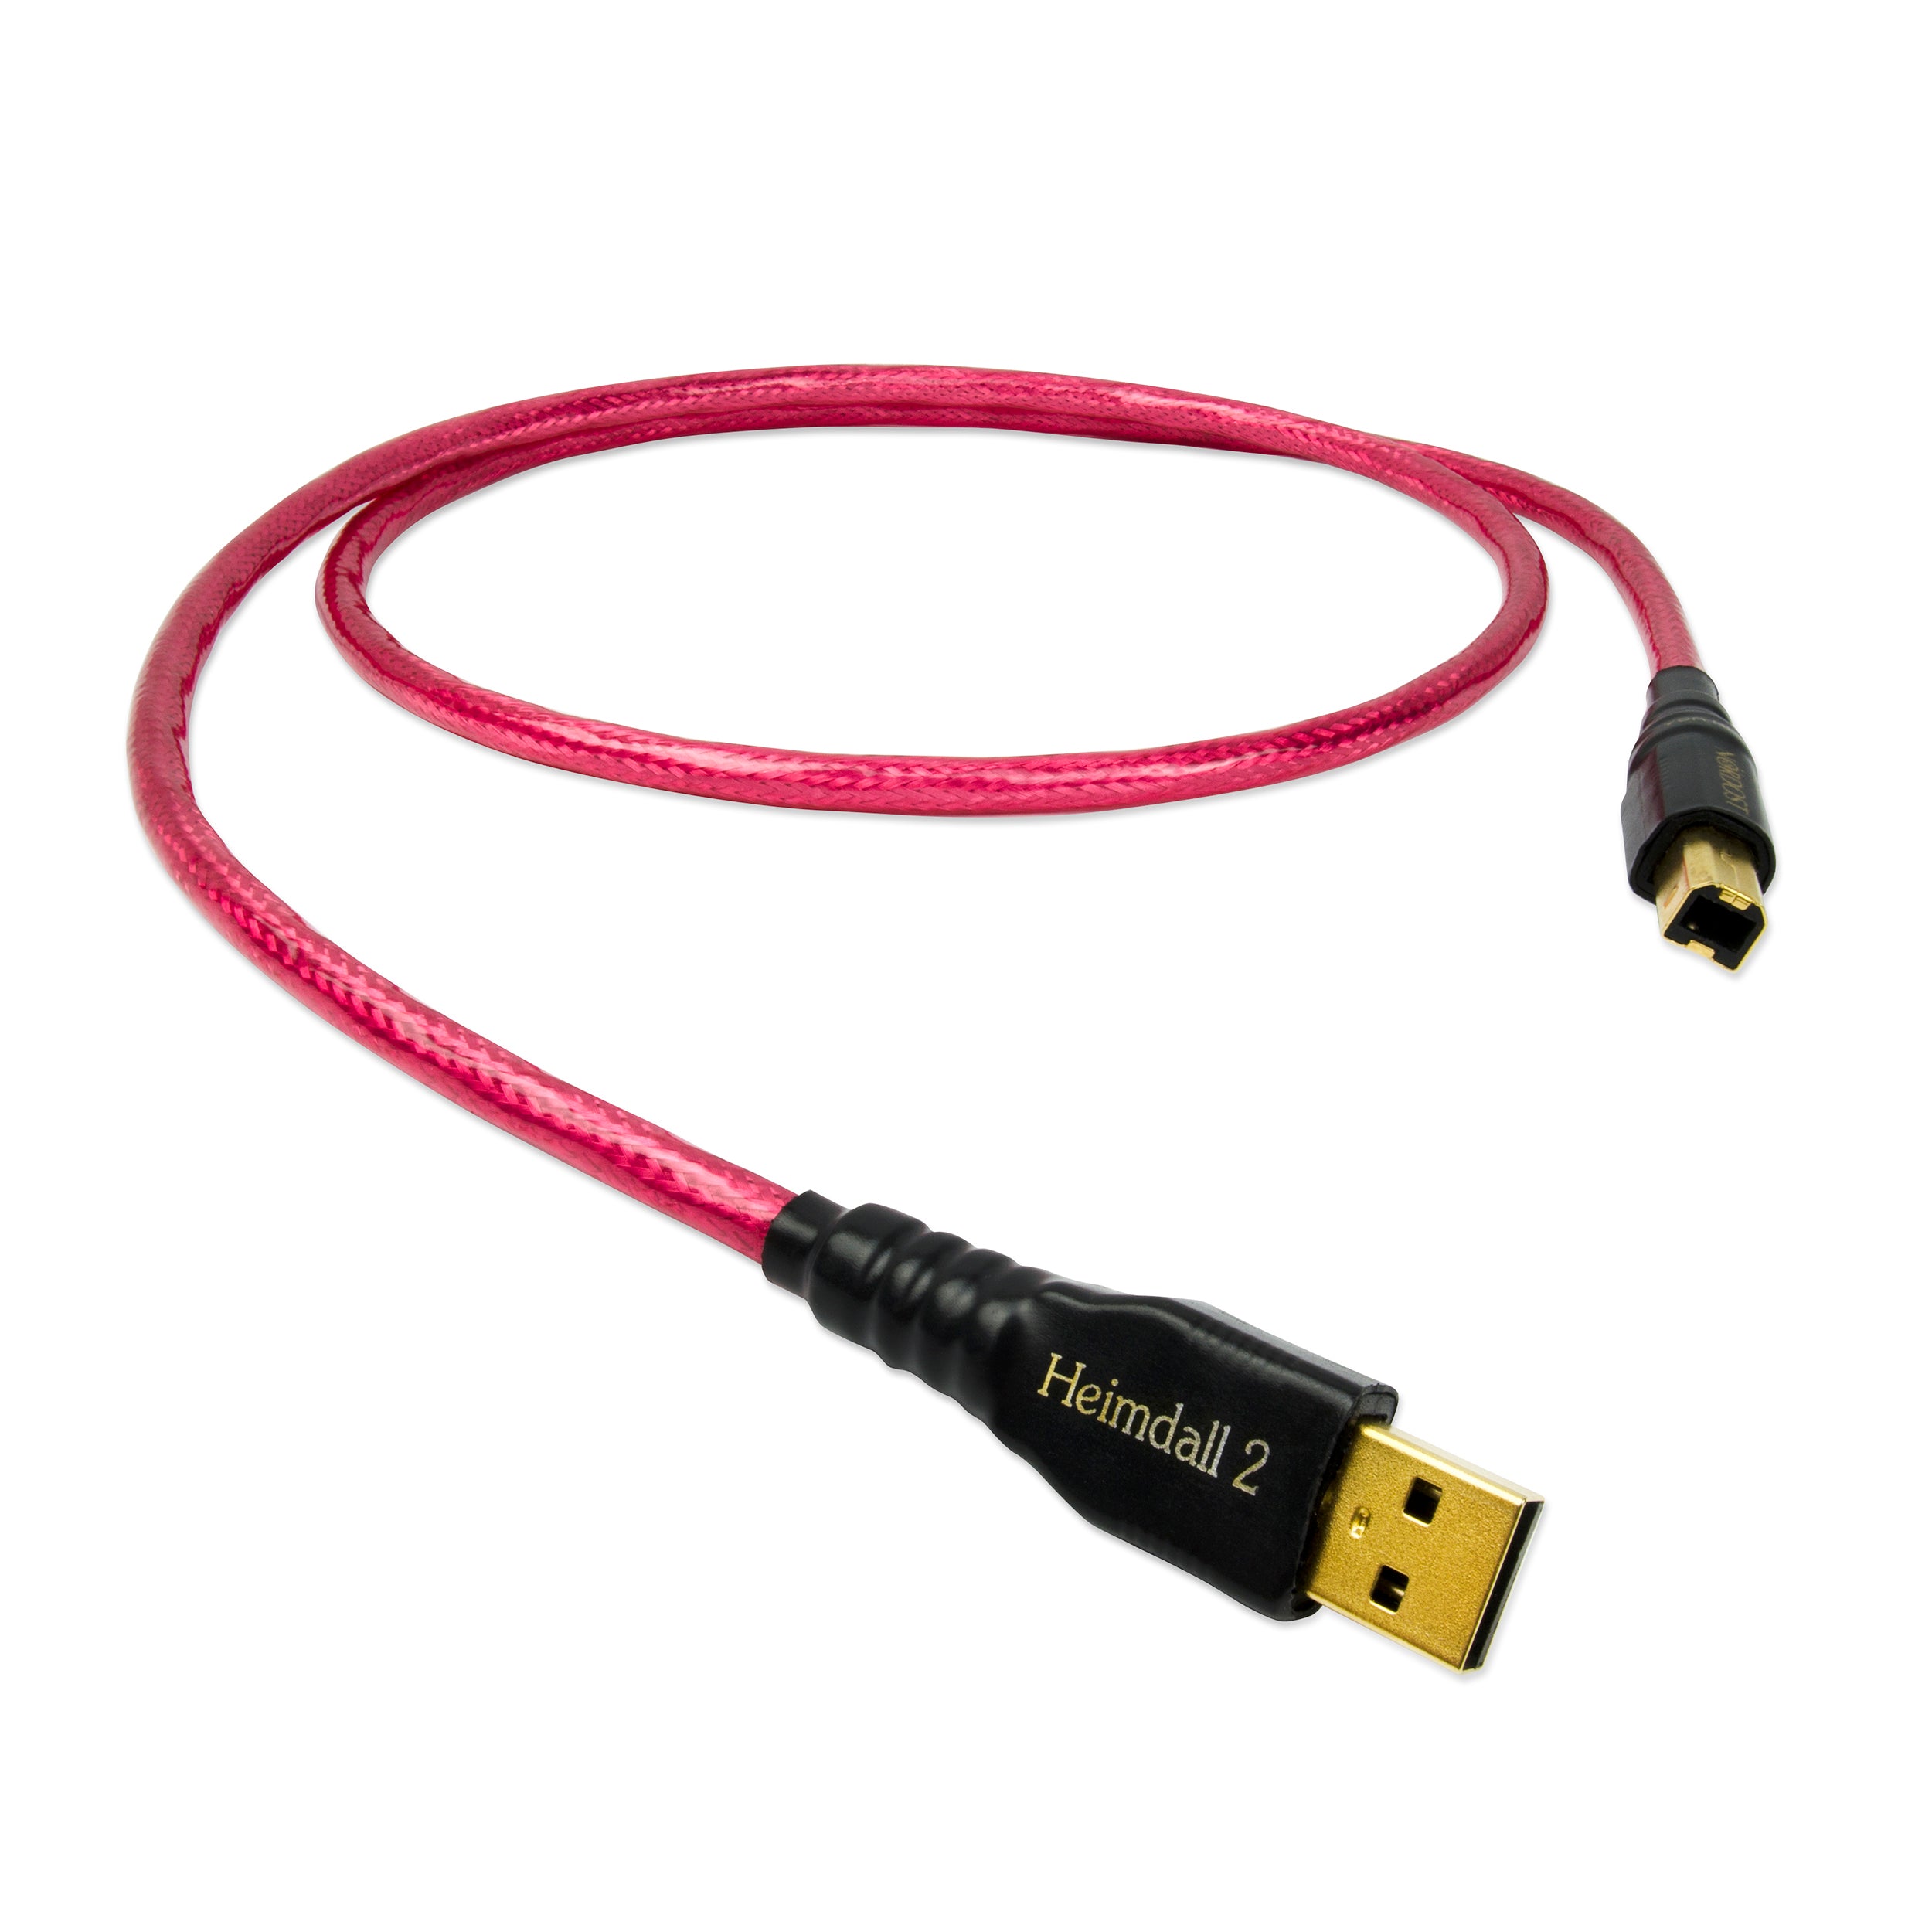 Nordost Norse Heimdall 2 USB 2.0 Cable